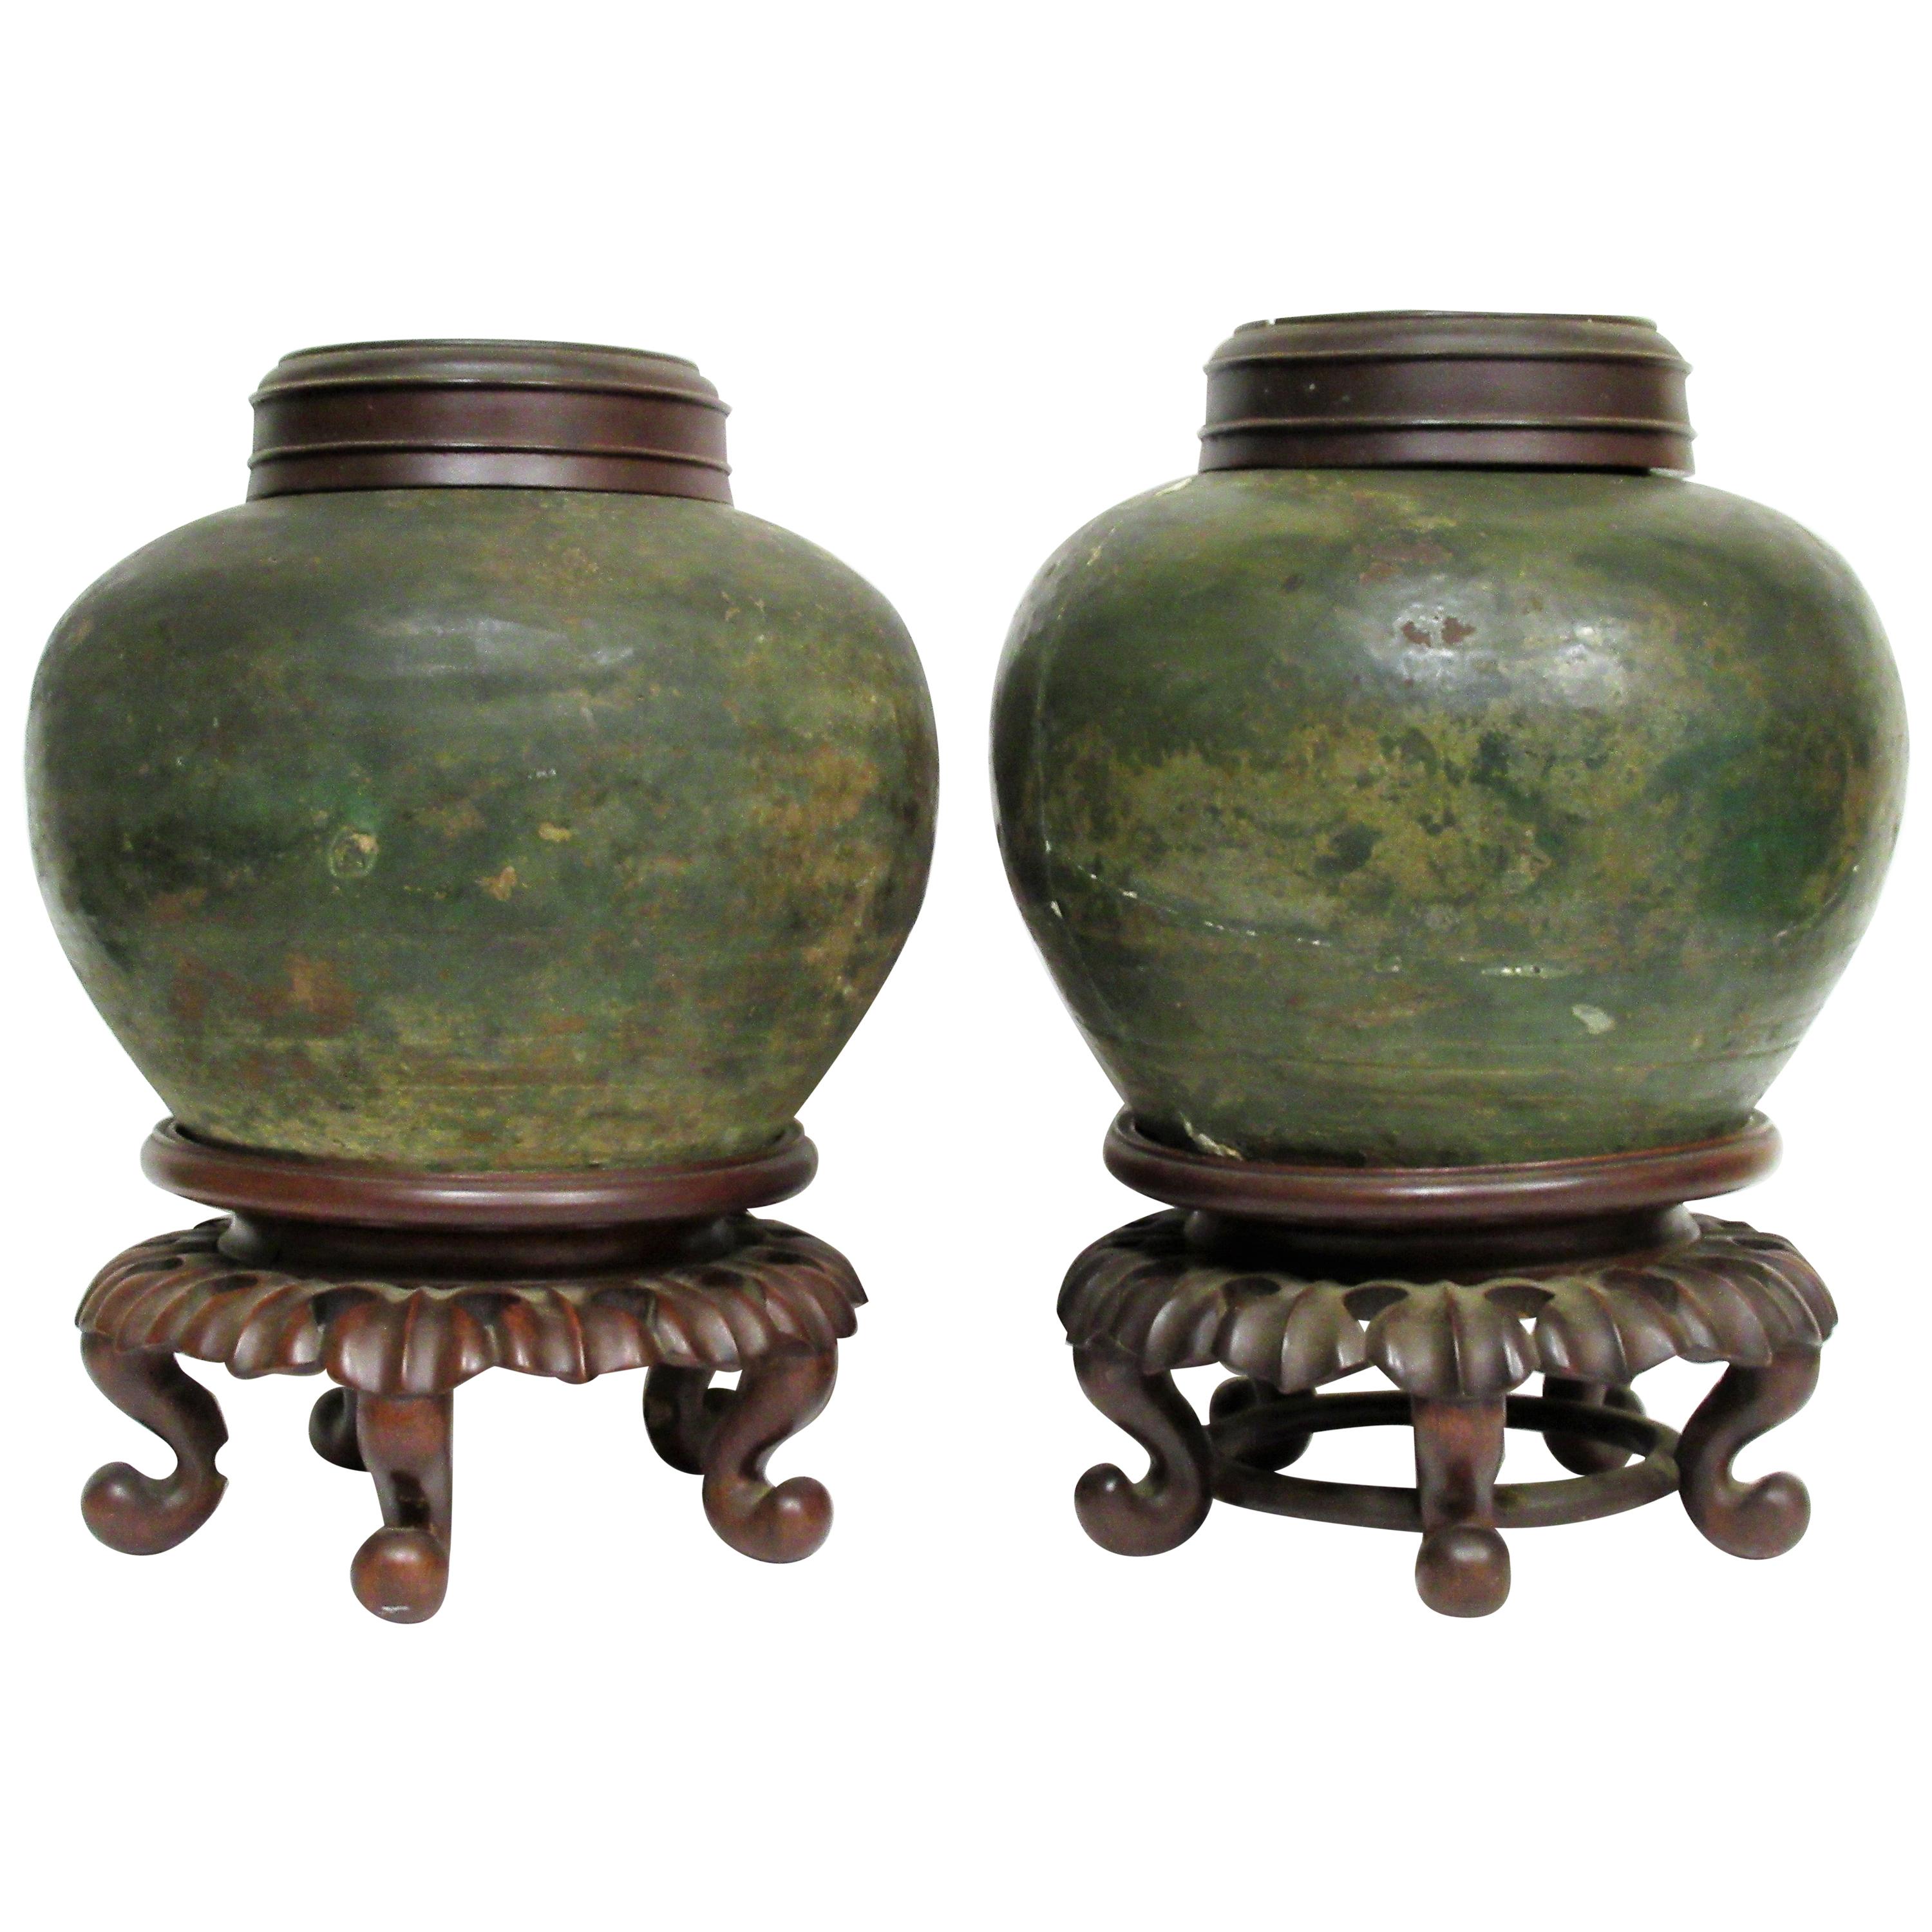 Early Antique Chinese Tea Jars